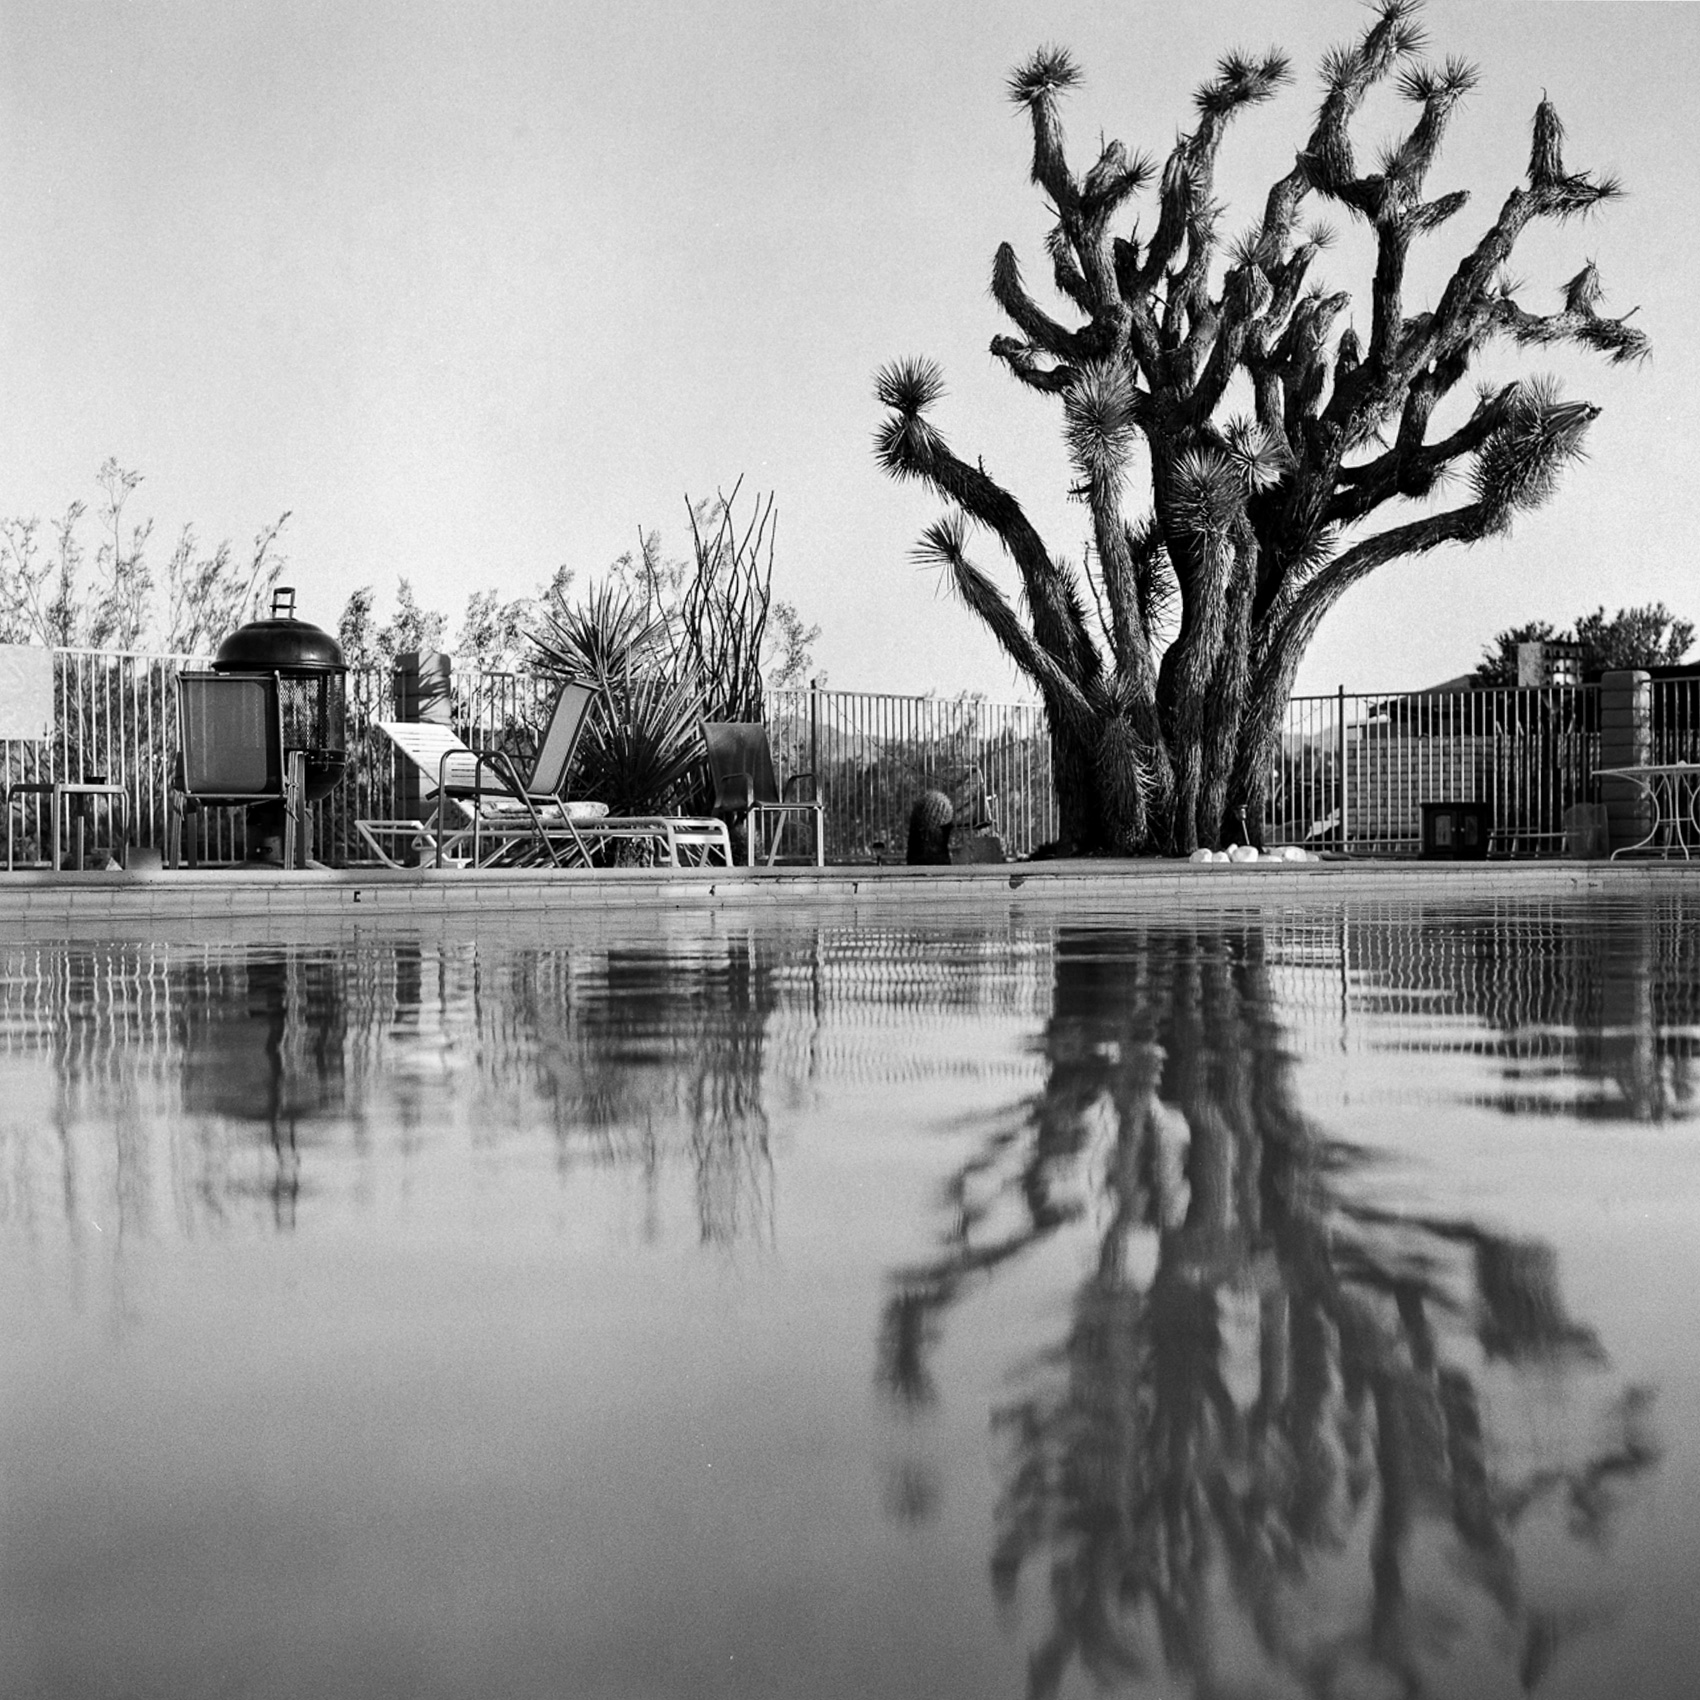 A-BLACK-AND-WHITE-IMAGE-OF-A-JOSHUA-TREE-REFLECTS-IN-A-POOL-OF-A-BED-AND-BREAKFAST